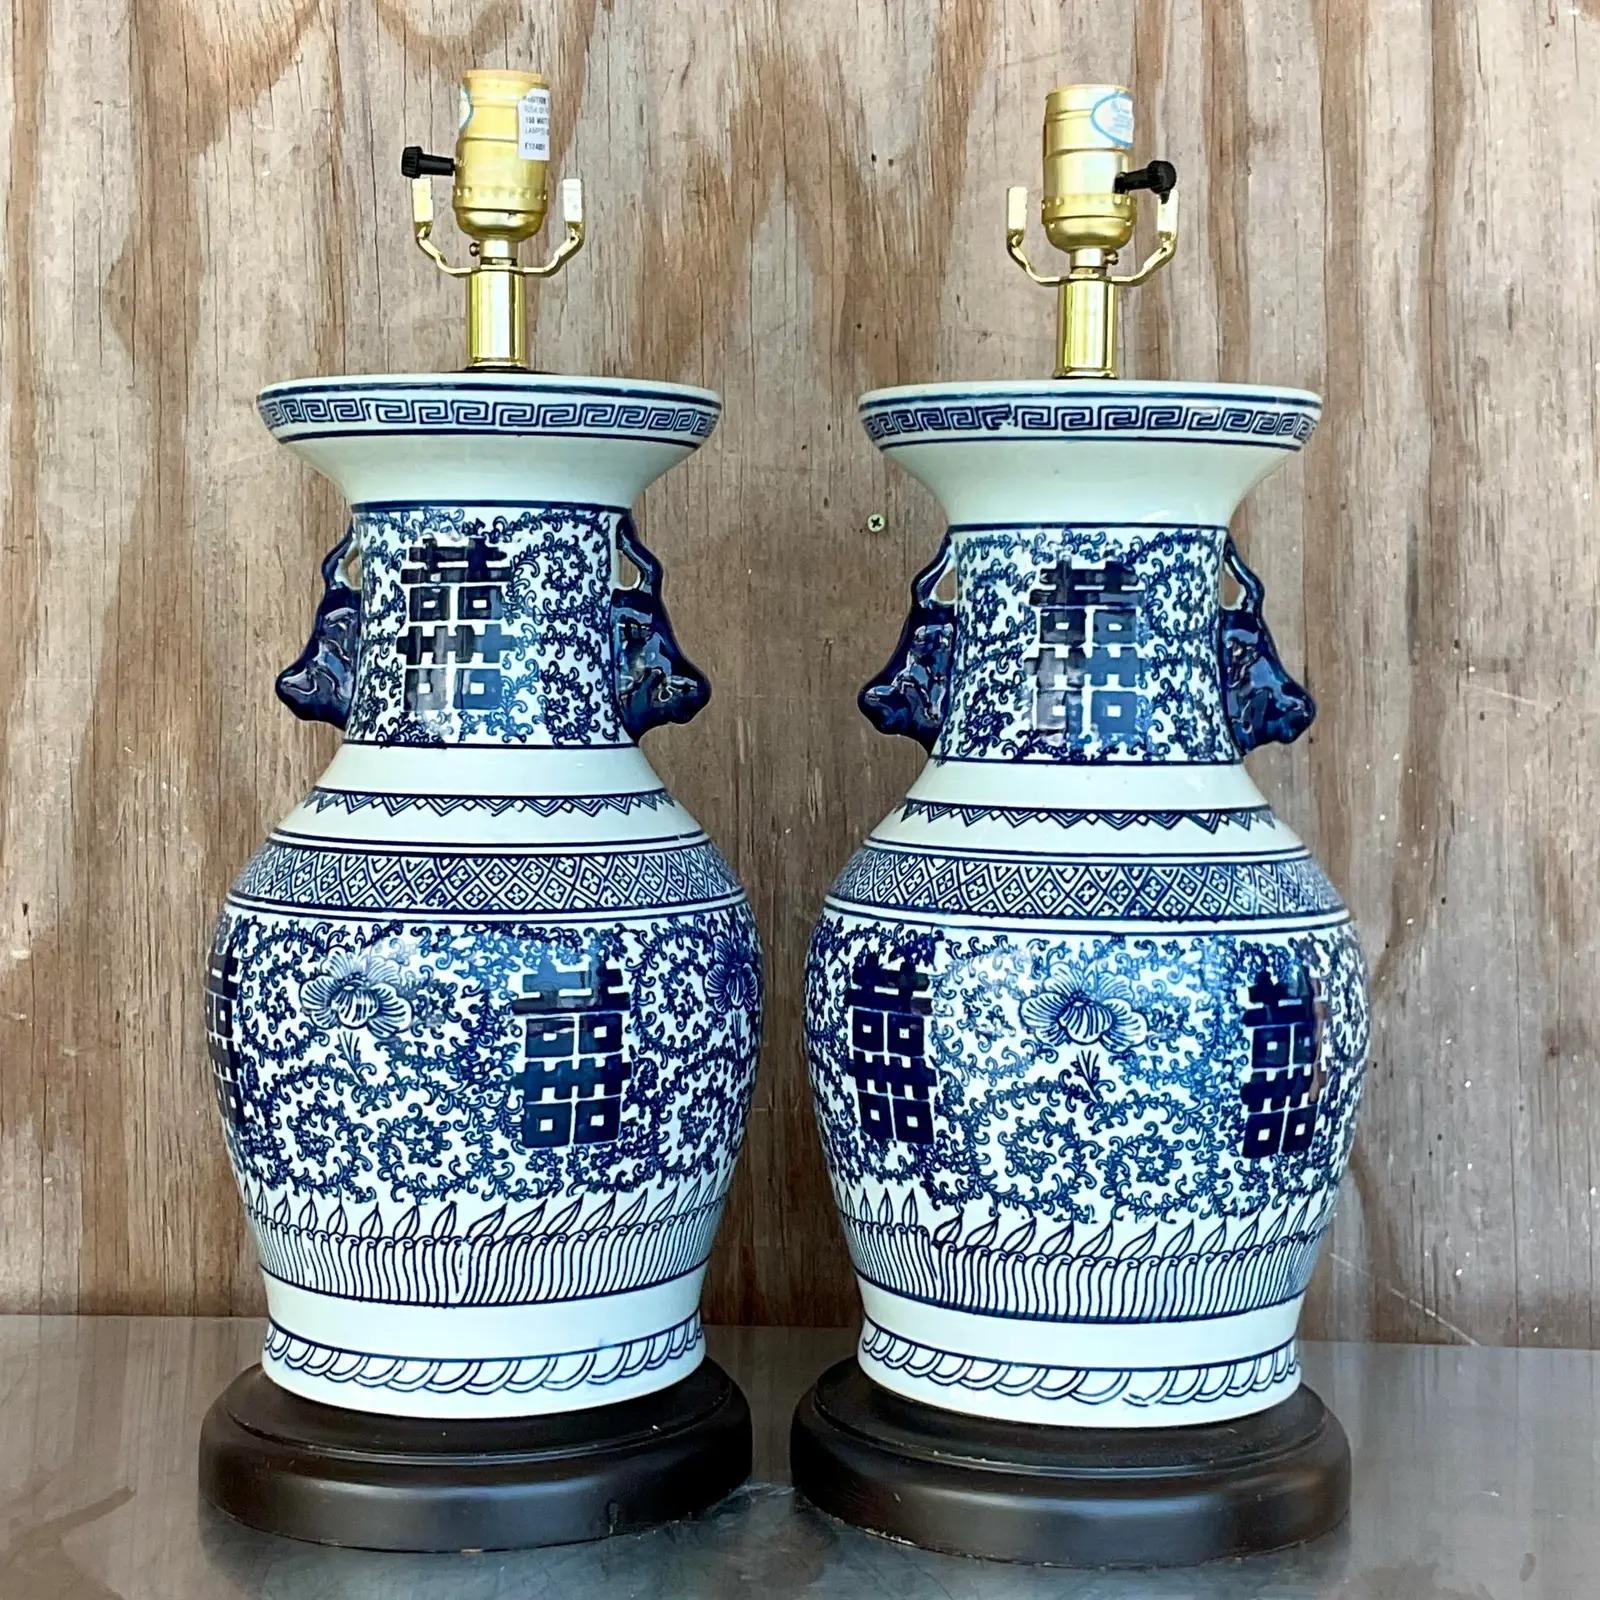 Fantastic pair of vintage table lamps. Classic blue and white design with Asian characters on a Ming base shape. Rest on wooden plinths. Acquired from a Palm Beach estate.

The lamps are in great vintage condition. Minor scuffs and blemishes